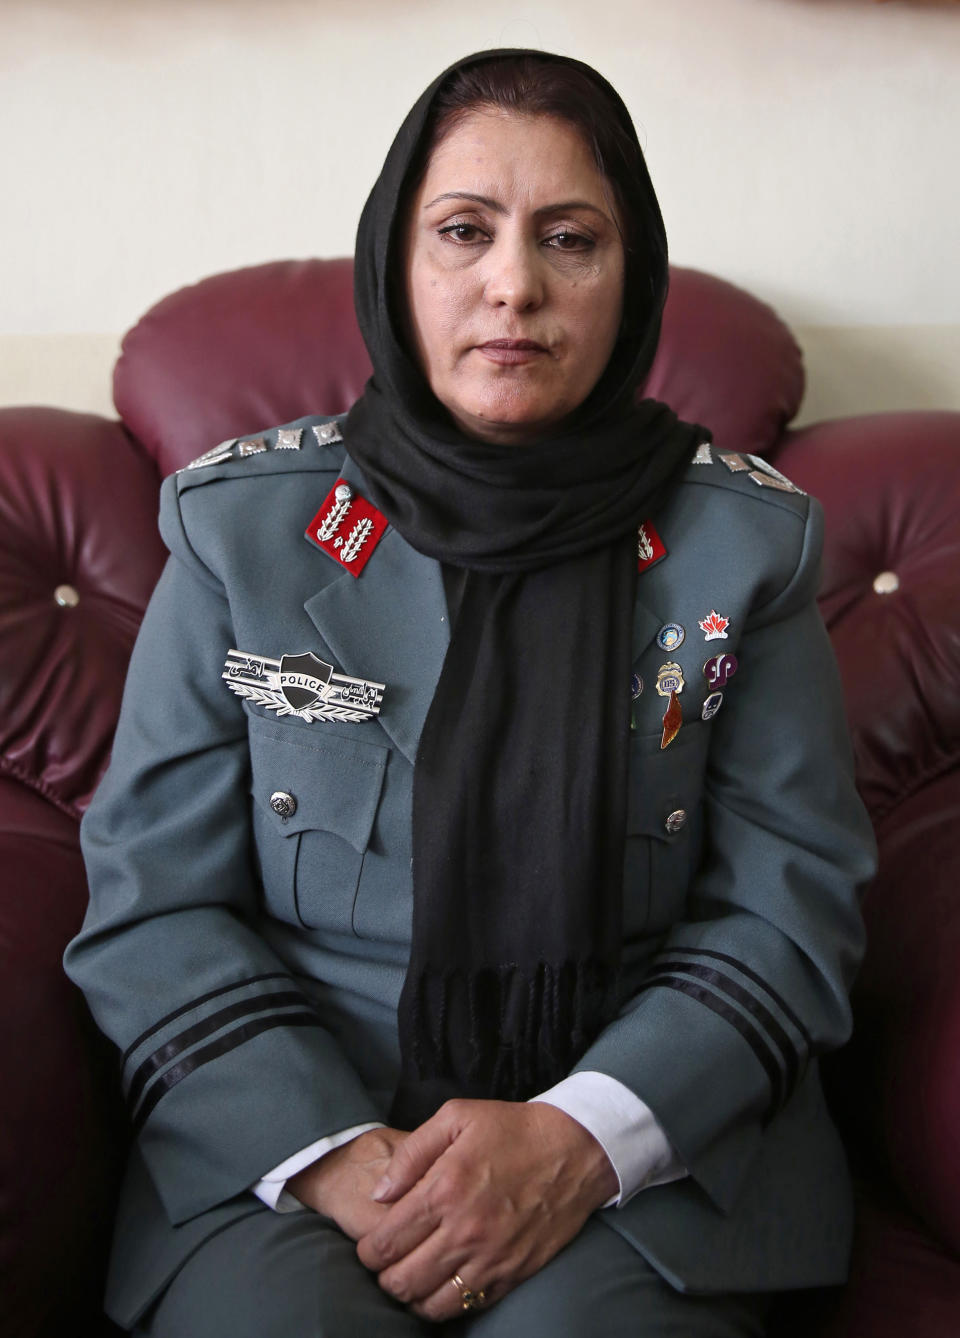 Afghanistan's first-ever female district police chief, Col. Jamila Bayaz, 50, poses for a photo during an interview at her office in Kabul, Afghanistan, Thursday, Jan. 16, 2014. Afghanistan's first-ever female district police chief drew stares on Thursday as she drove and walked around the center of the city, reviewing check points and some of the important business and administrative facilities she is tasked with protecting. (AP Photo/Massoud Hossaini)